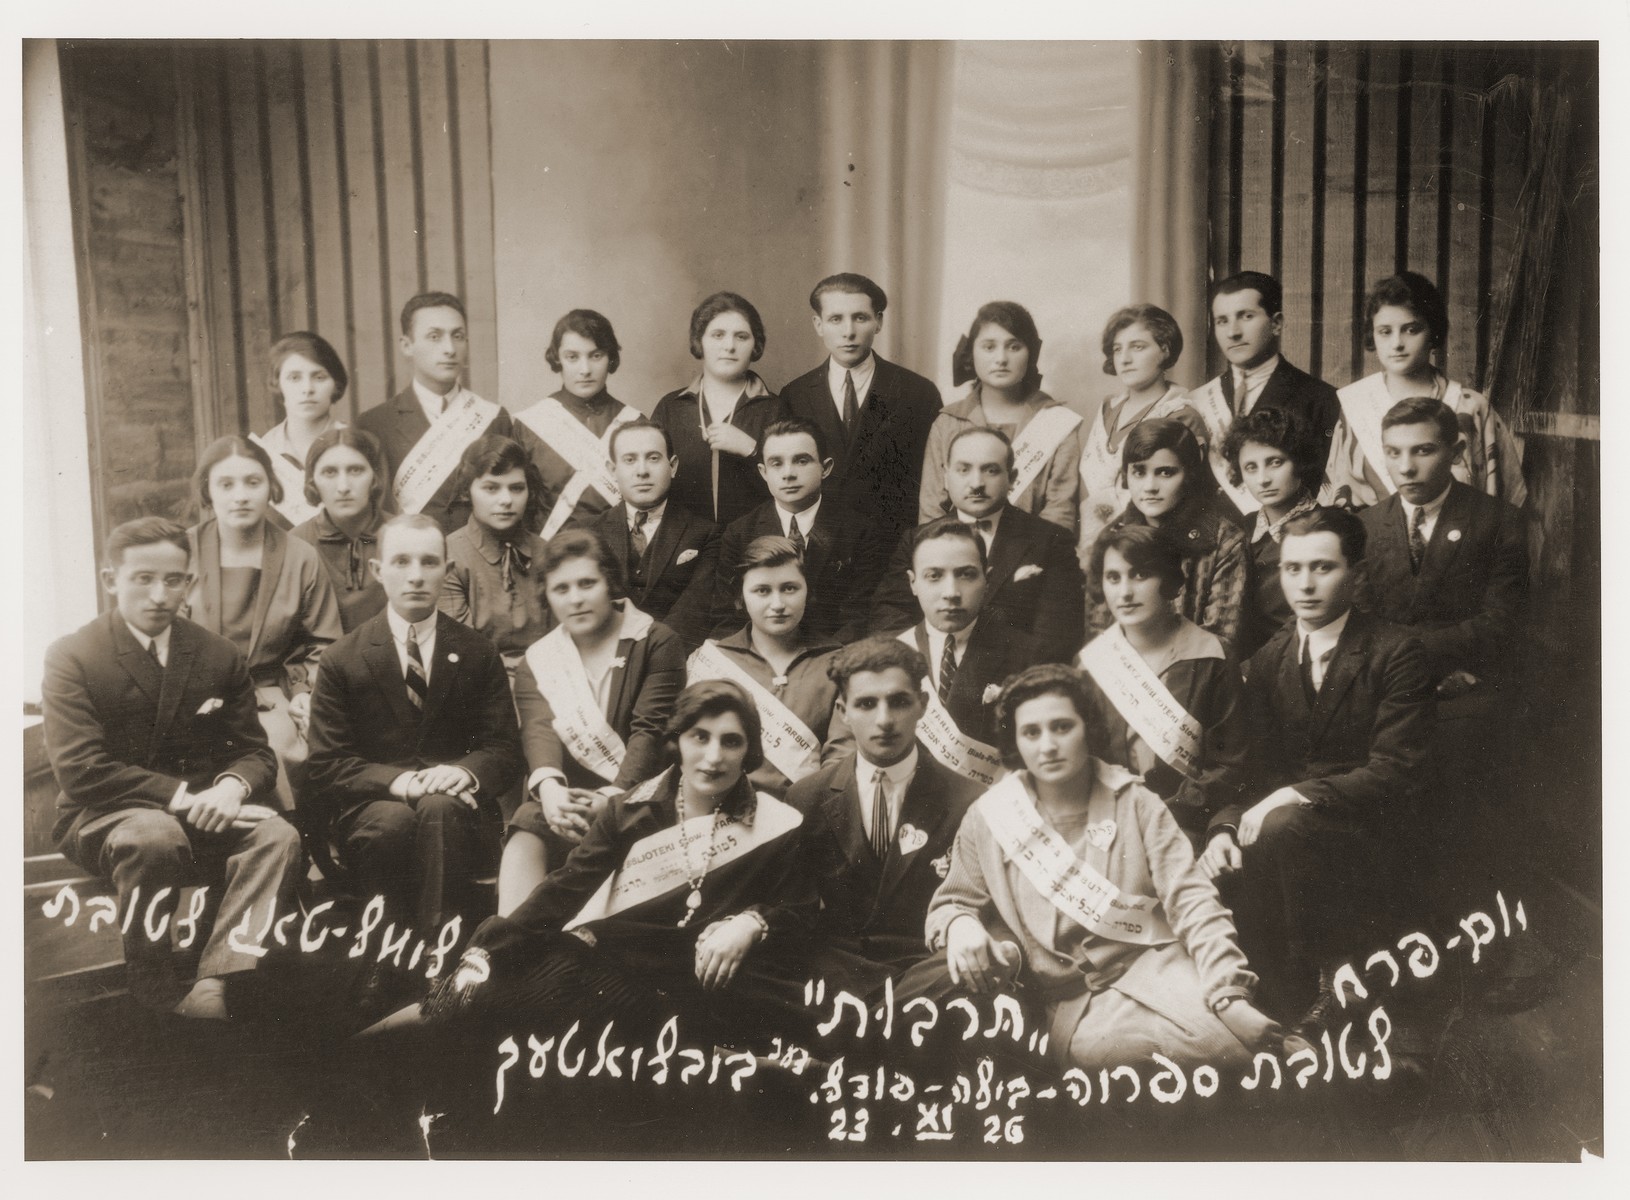 Group portrait of members of the "Biblioteka Tarbut" society in Biala.

Usher Rosenzweig is pictured in the back row, center.  Yeruchim Lipitz is in the front row, center.